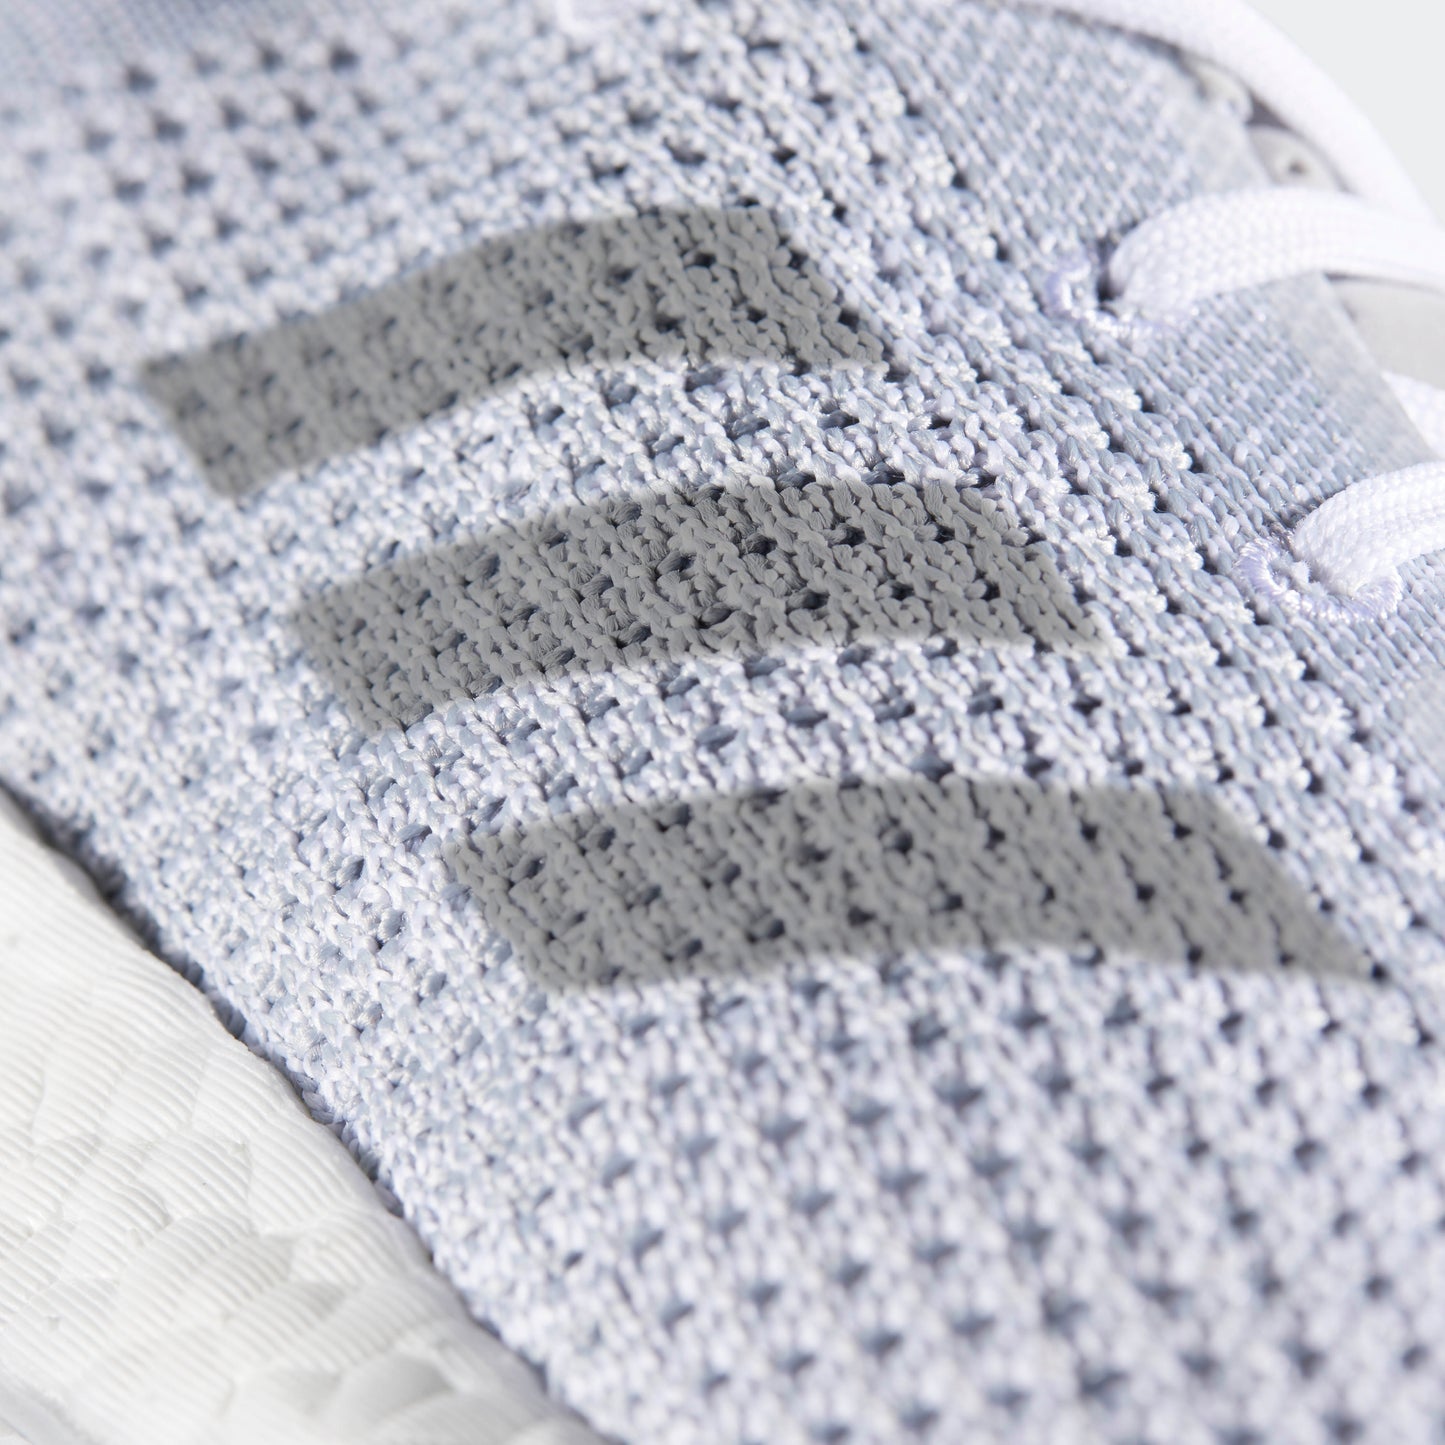 adidas PURE BOOST DPR Woven Shoes - Light Grey | Men's